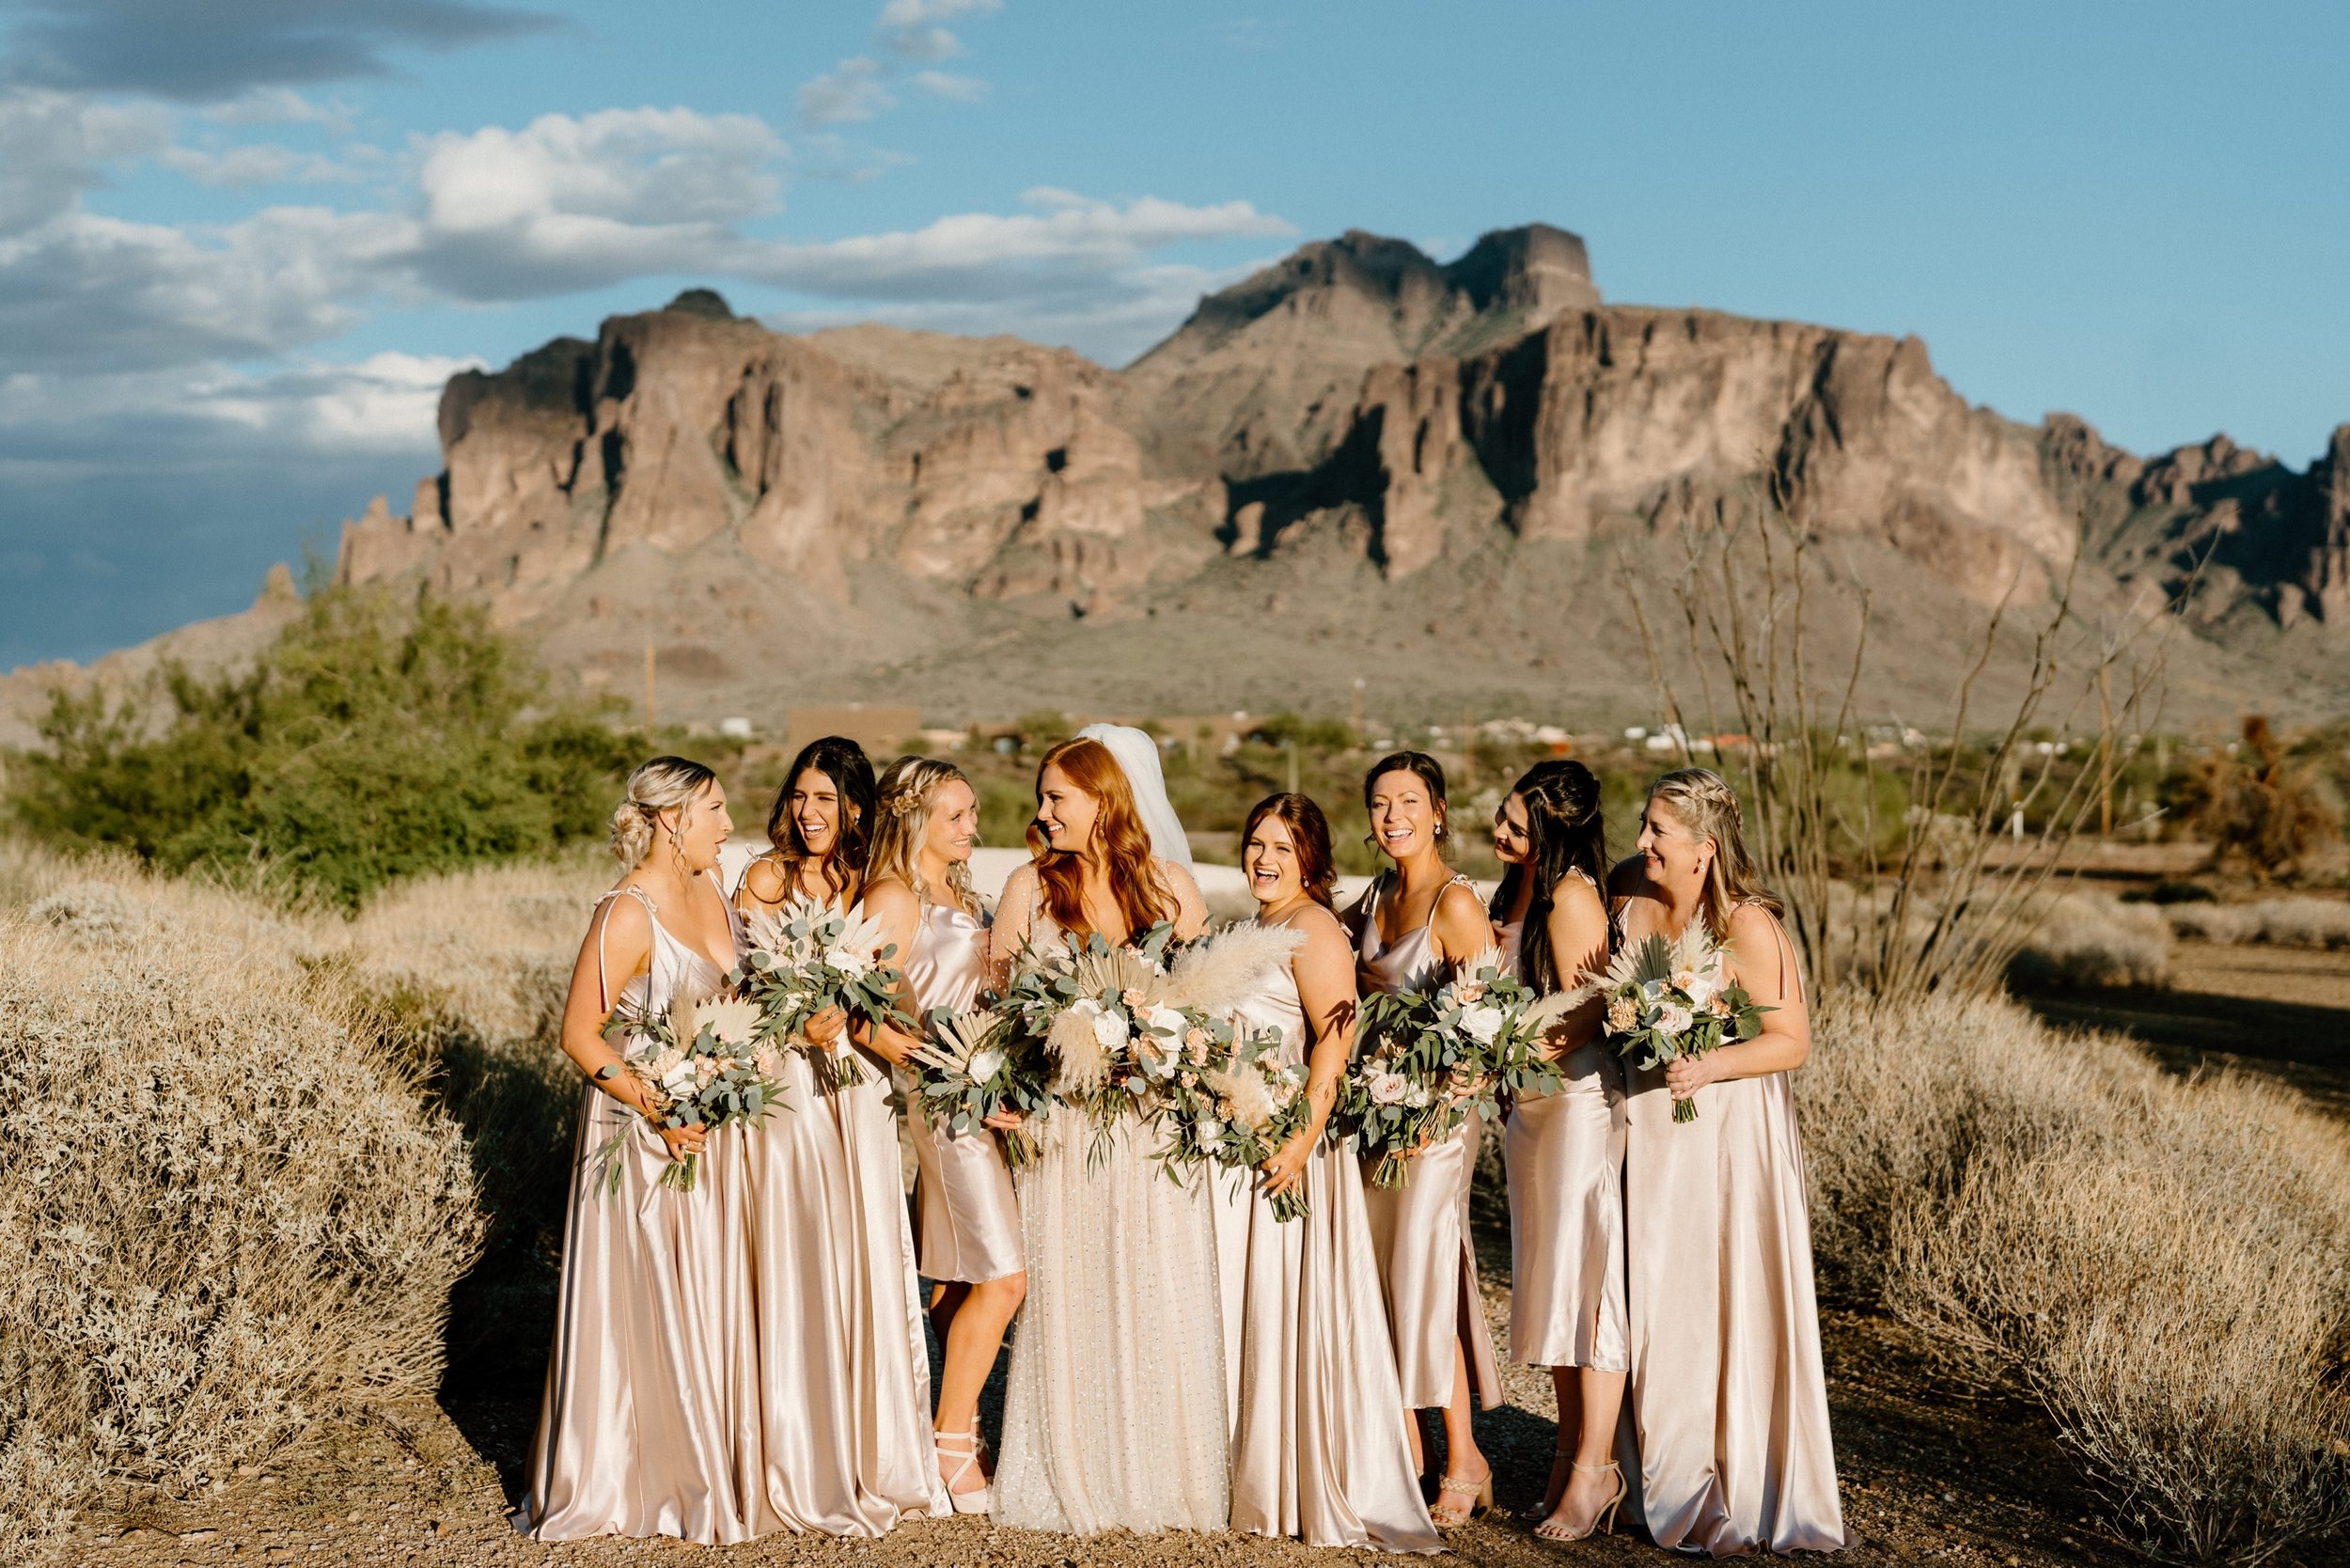 056_Wedding at The Paseo venue in Apache Junction, Arizona only 45 minutes from Phoenix..jpg